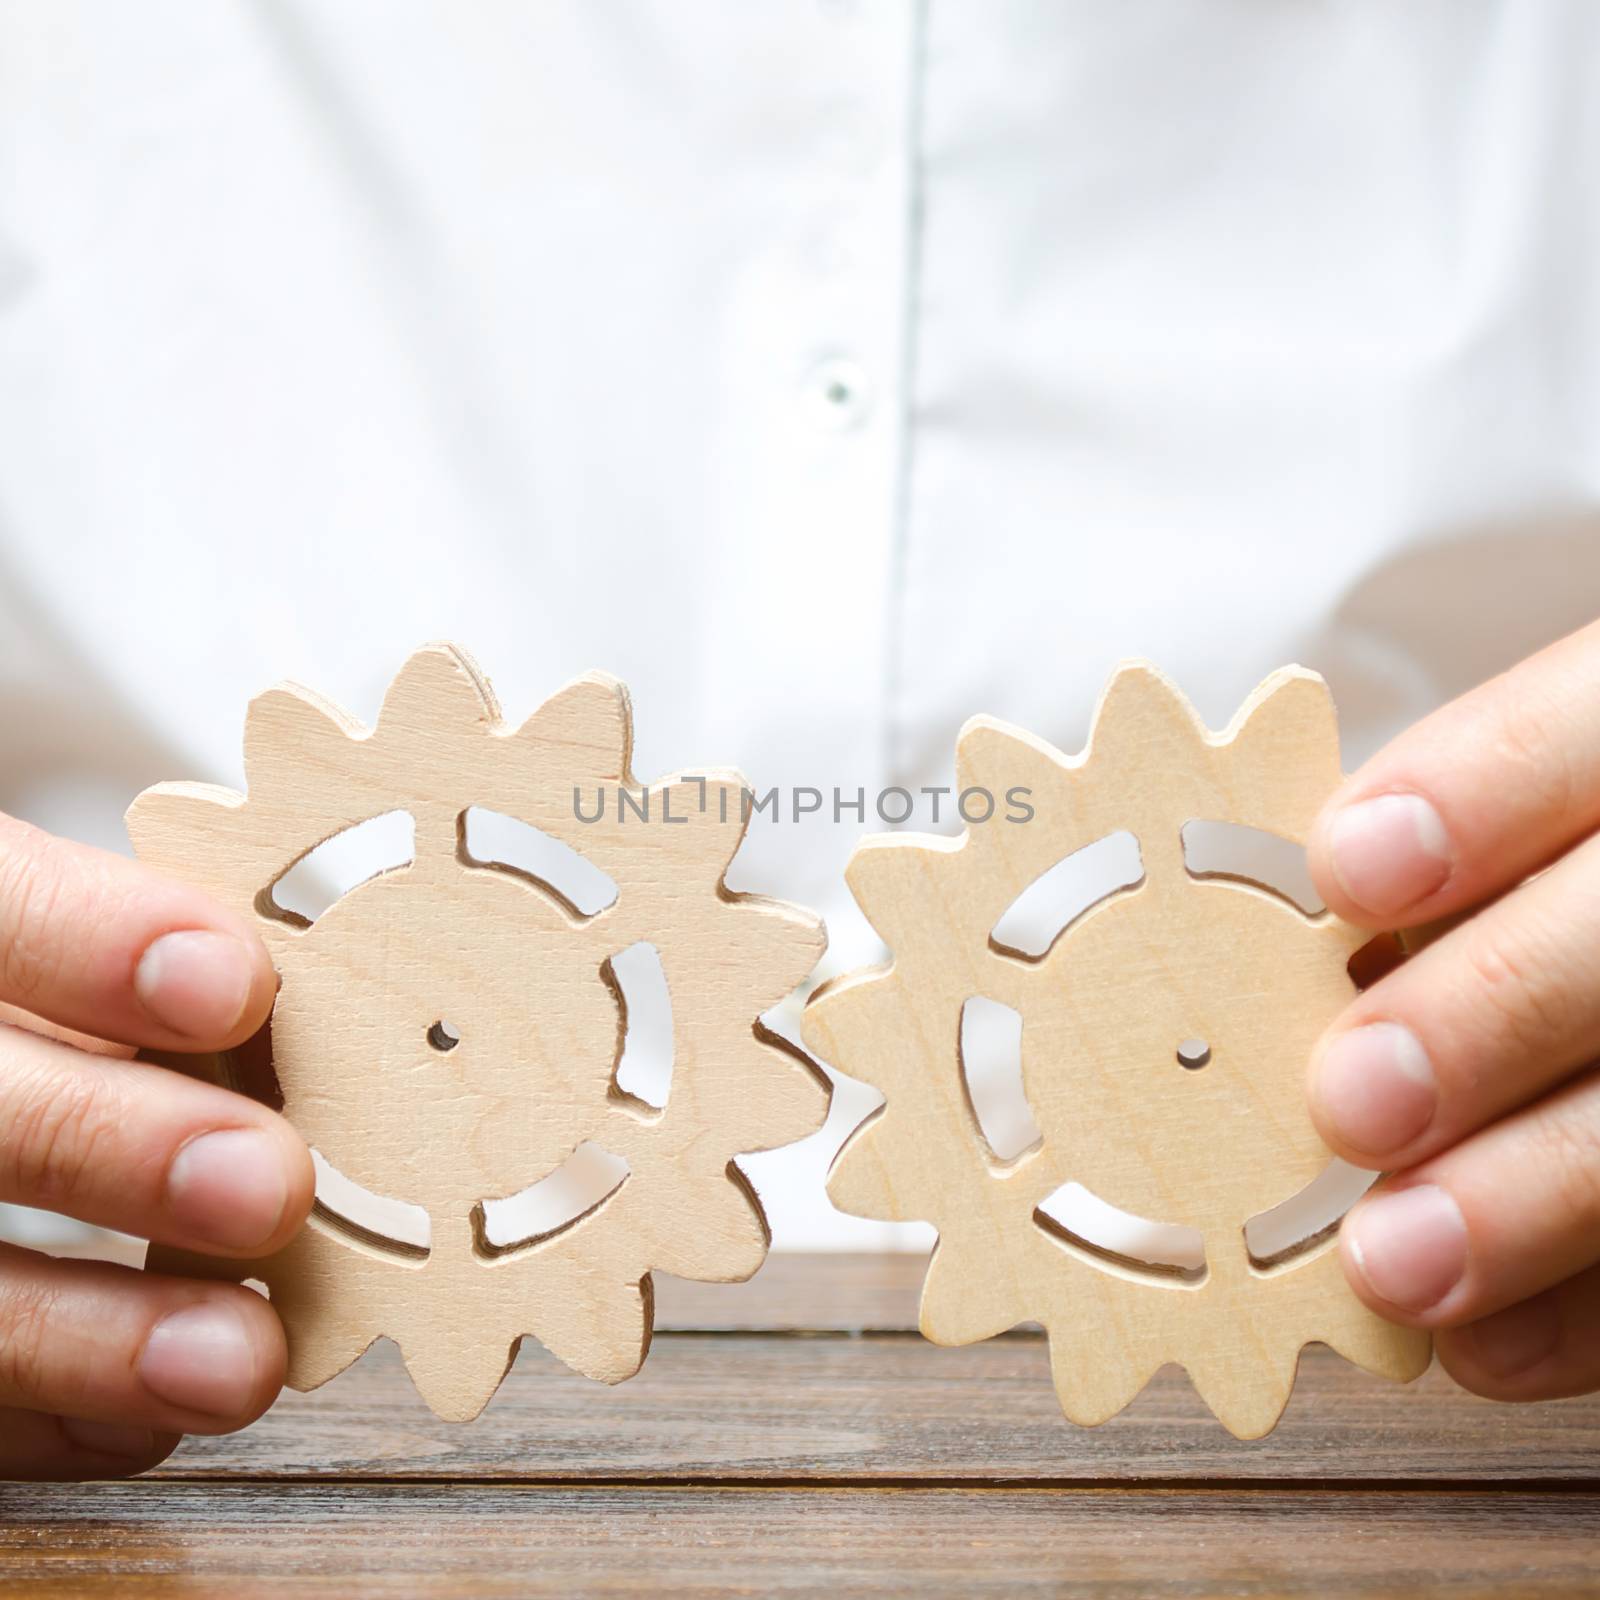 Businessman in white shirt connects two wooden gears. Improving work efficiency, establishing new connections and suppliers. Symbolism of establishing business processes and communication. by iLixe48